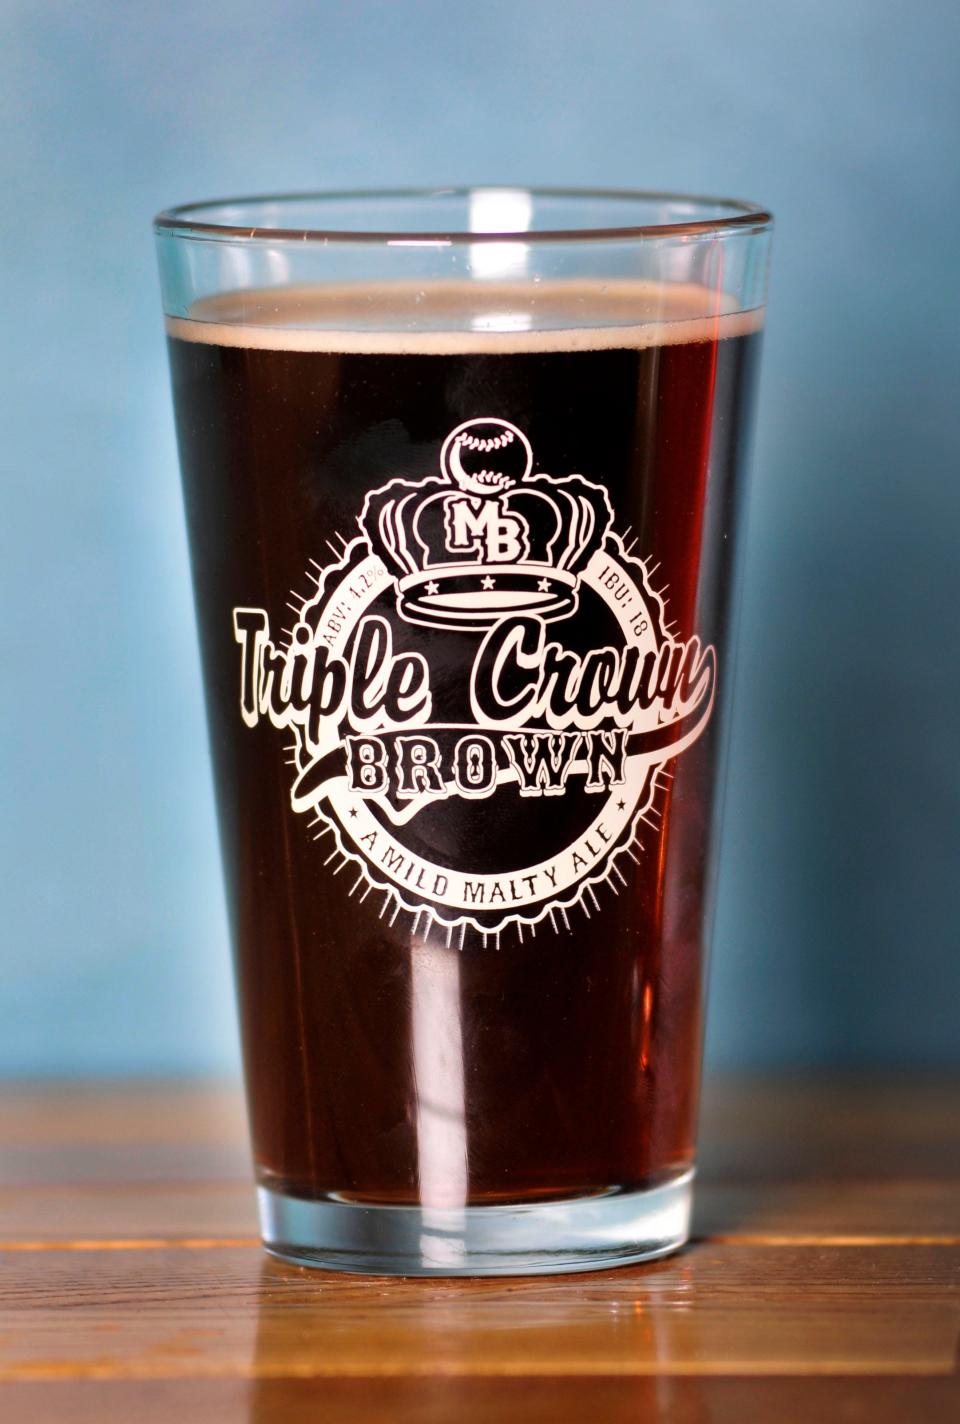 Triple Crown Brown, an English brown ale from The Mitten Brewing Co., won a gold medal in the 2022 World Beer Cup.